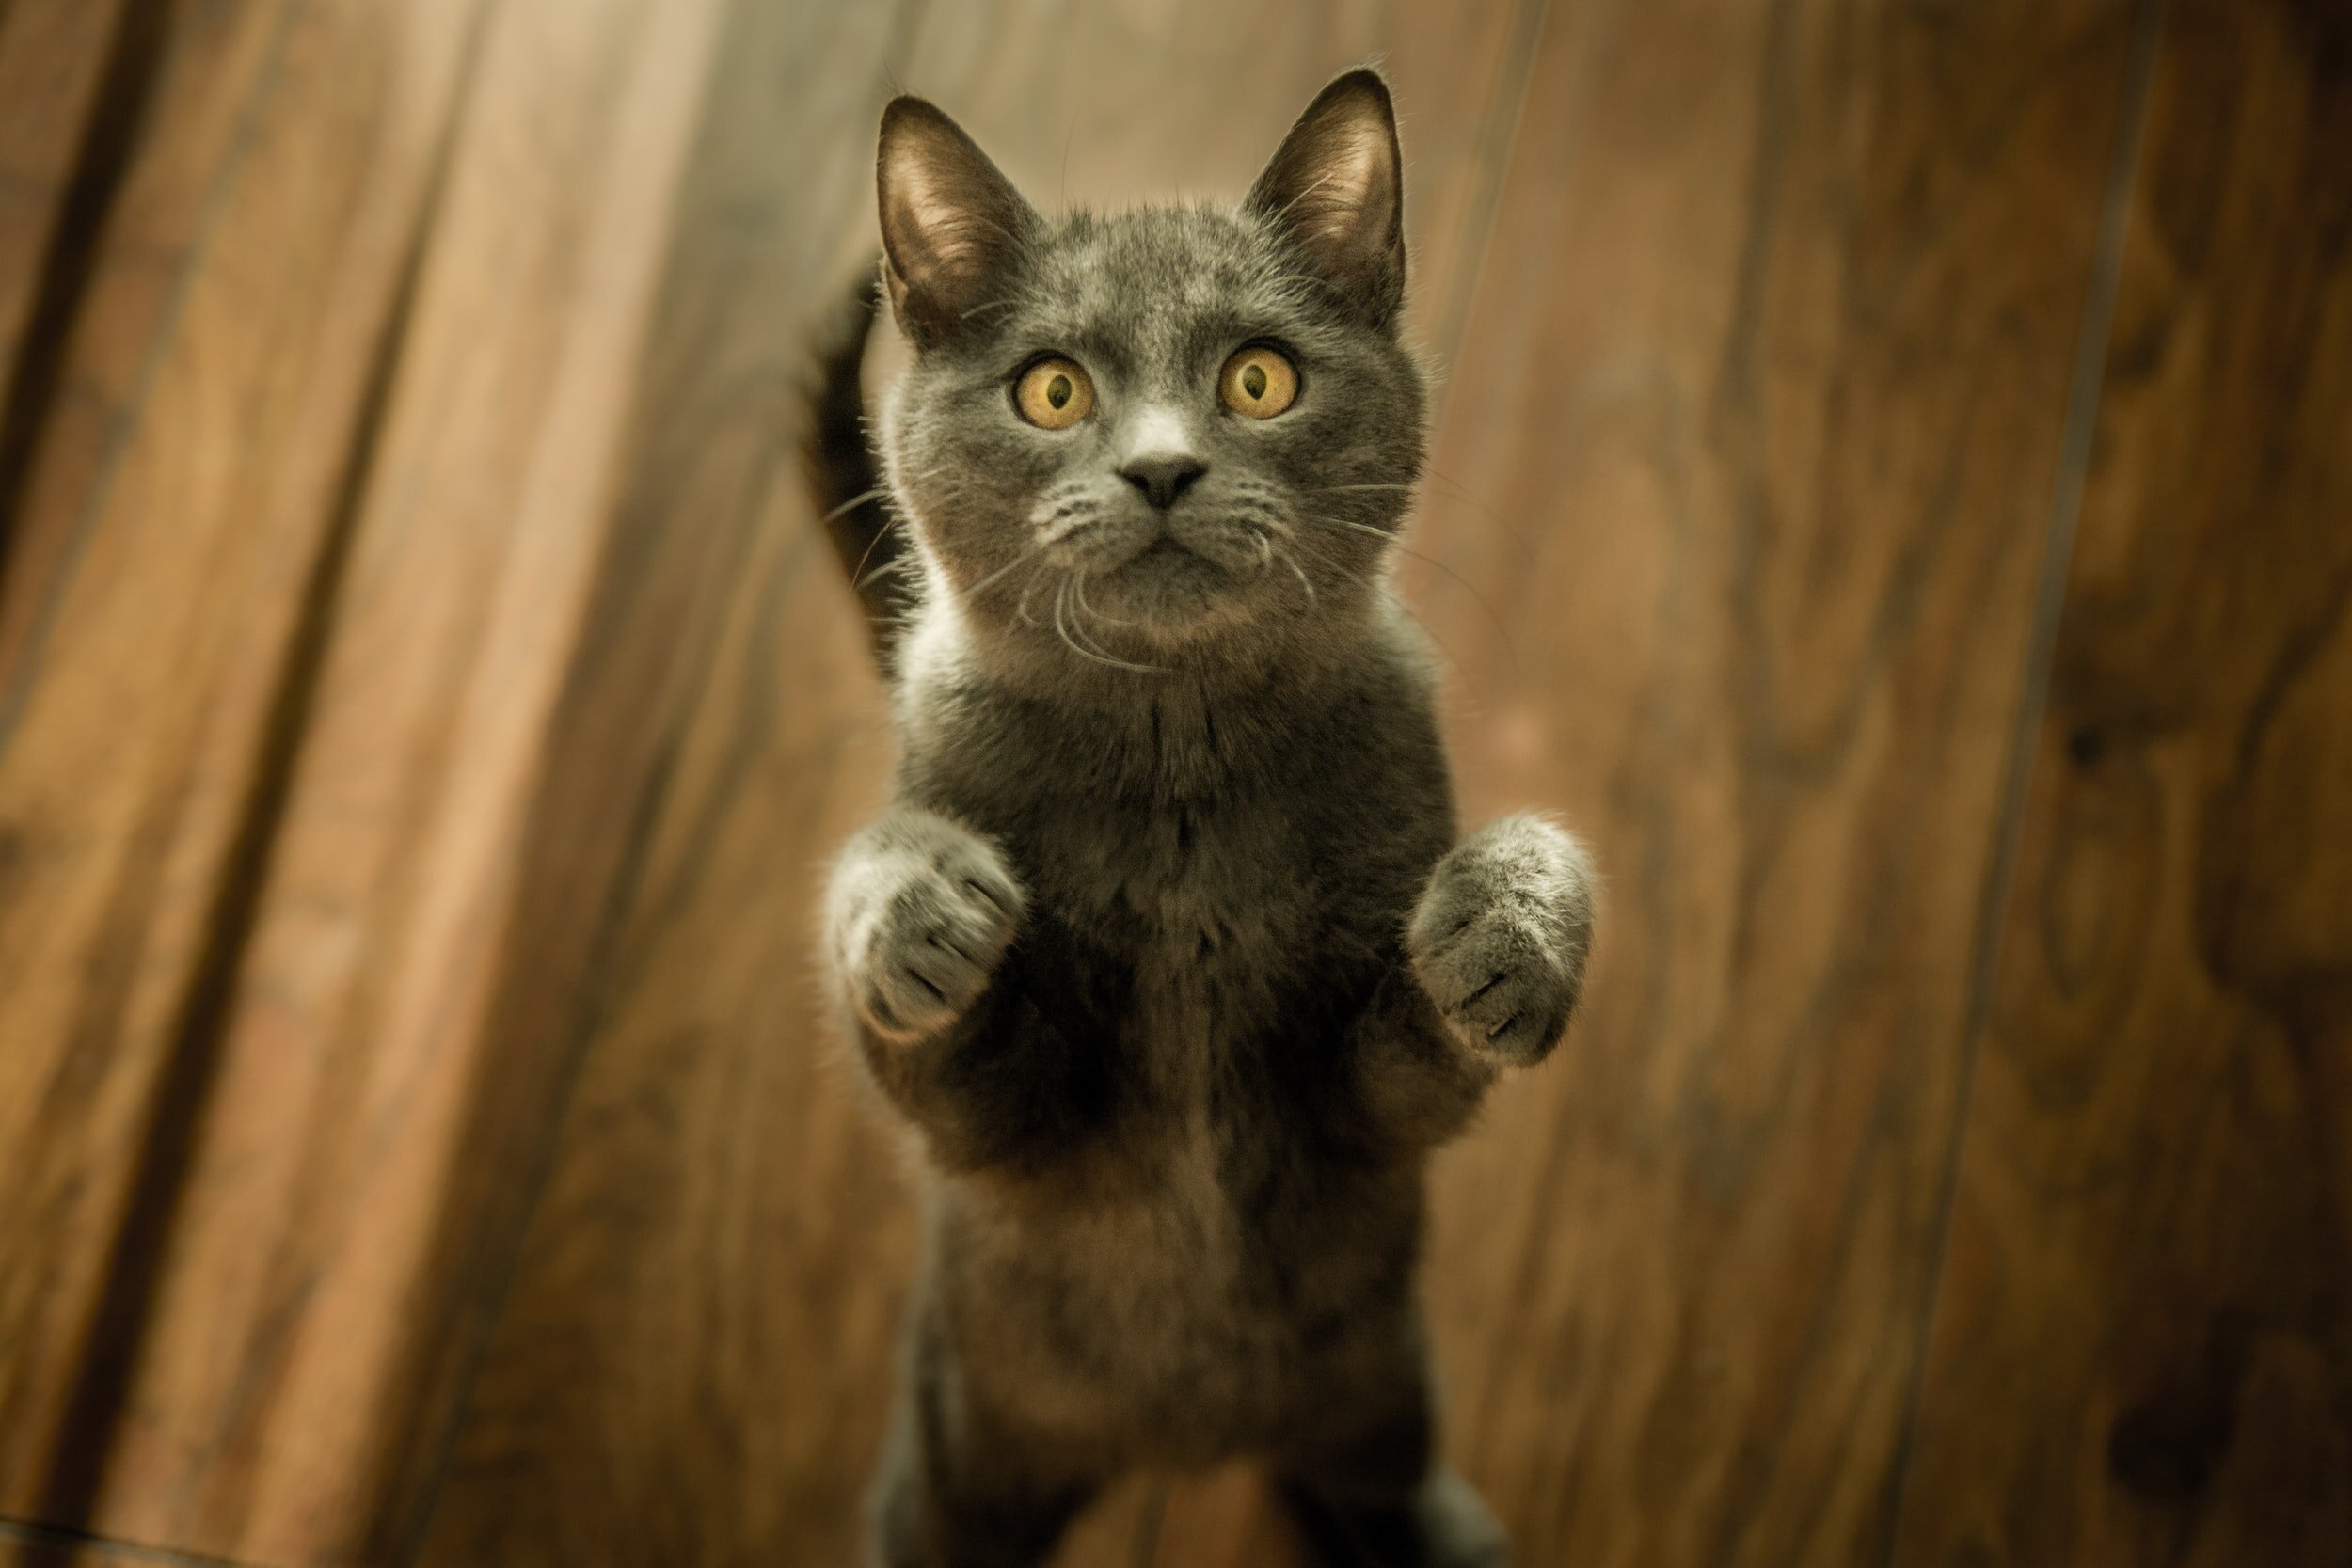 Cat Aggression: Fighting, Biting, and Attacking